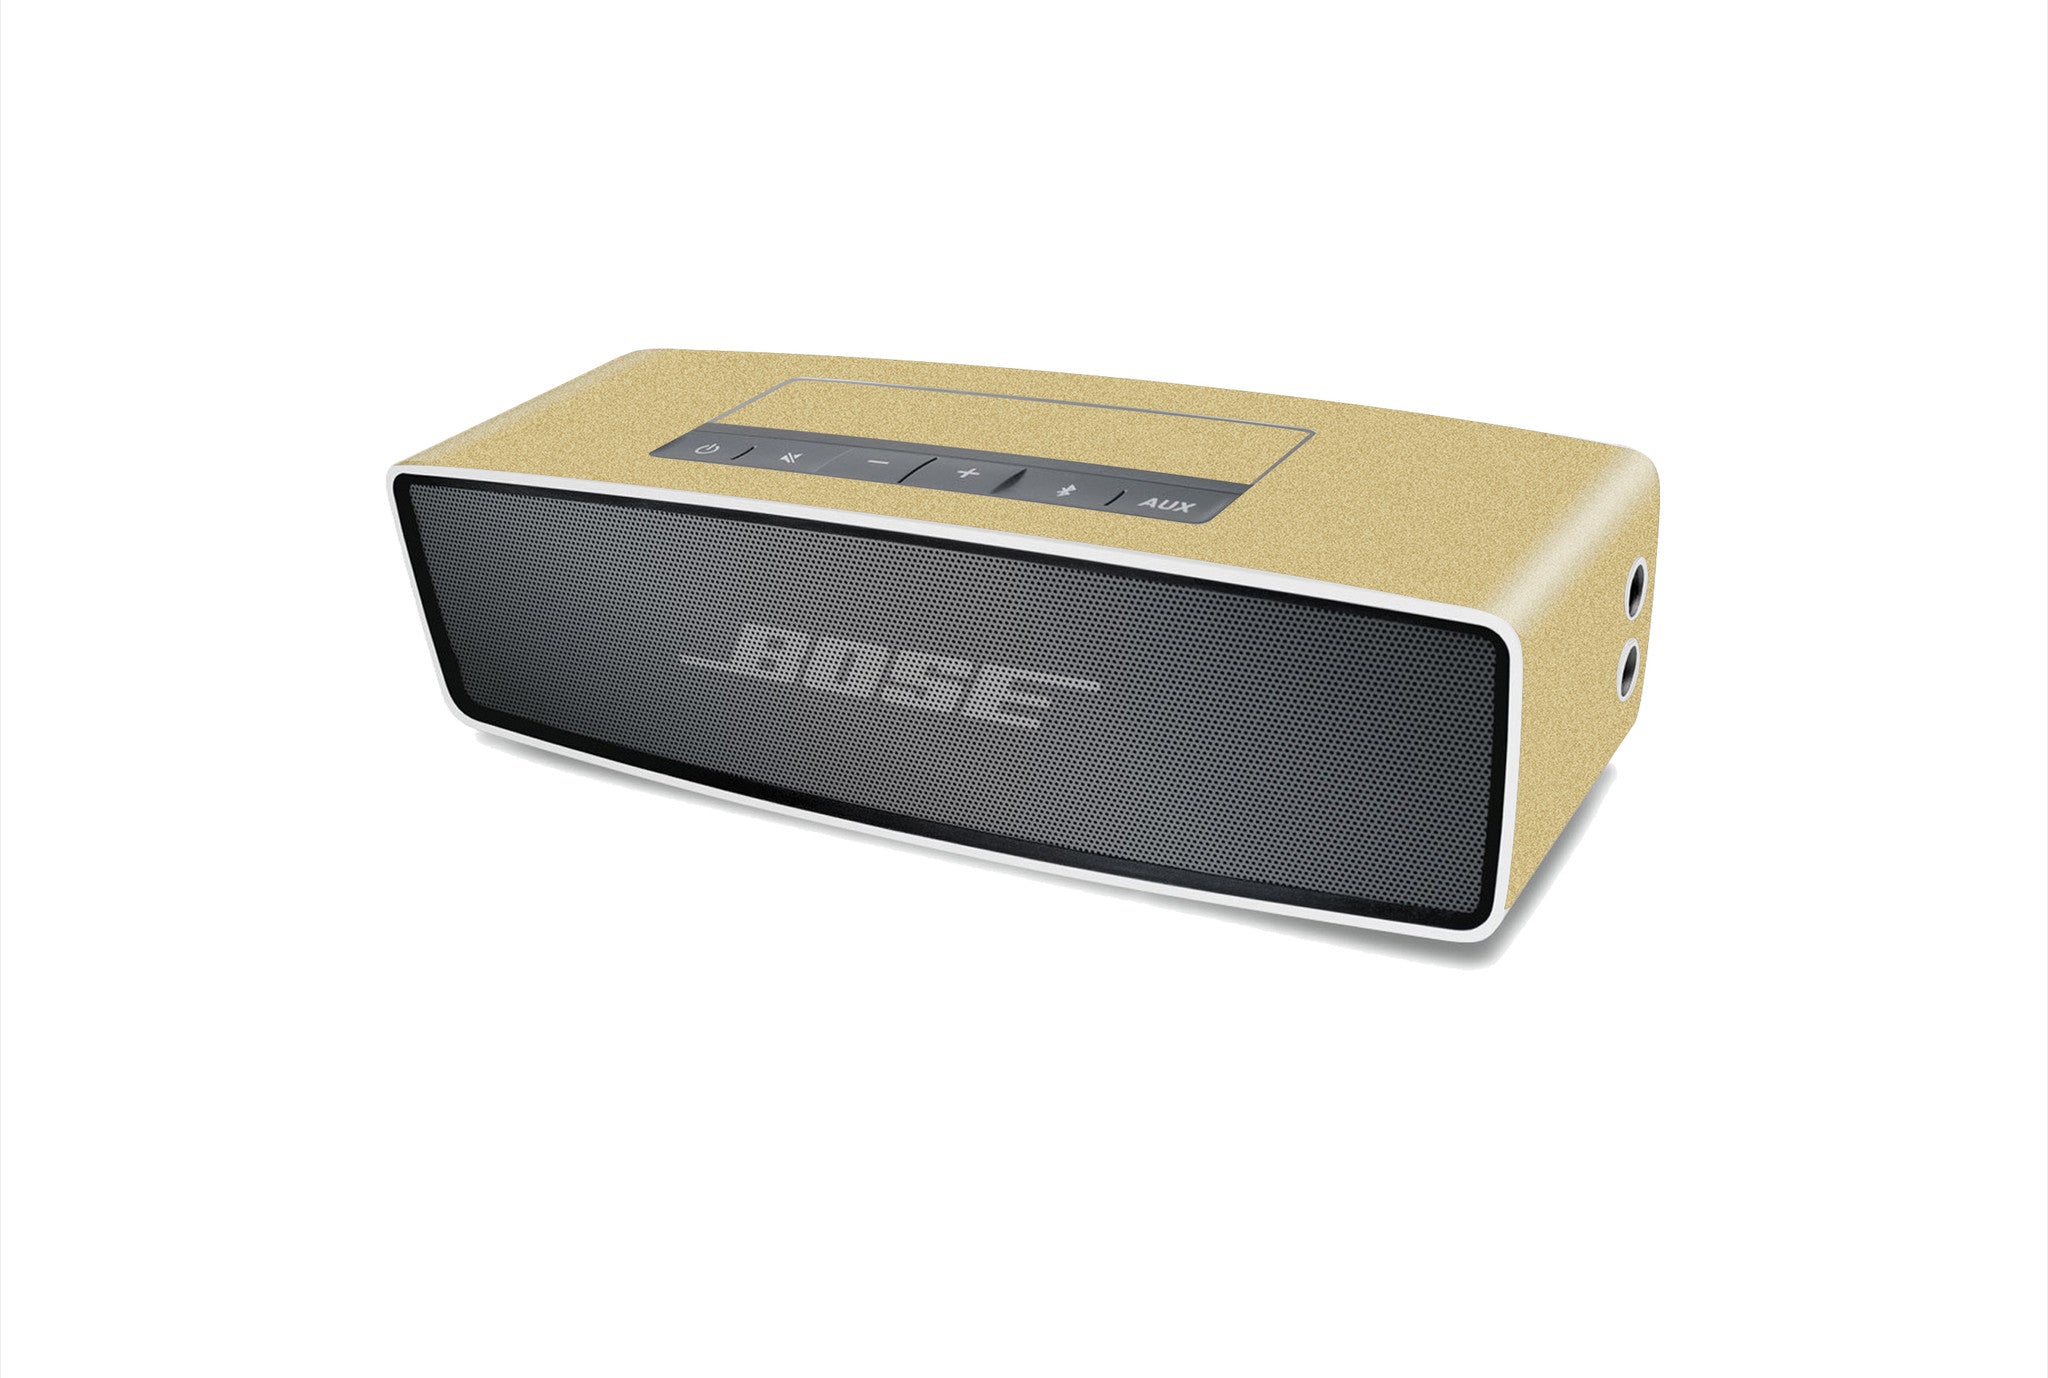 Syd miles journalist Champagne Gold - Bose SoundLink Mini 1, 2 Skins | Stickerboy Skins for  protecting your mobile device